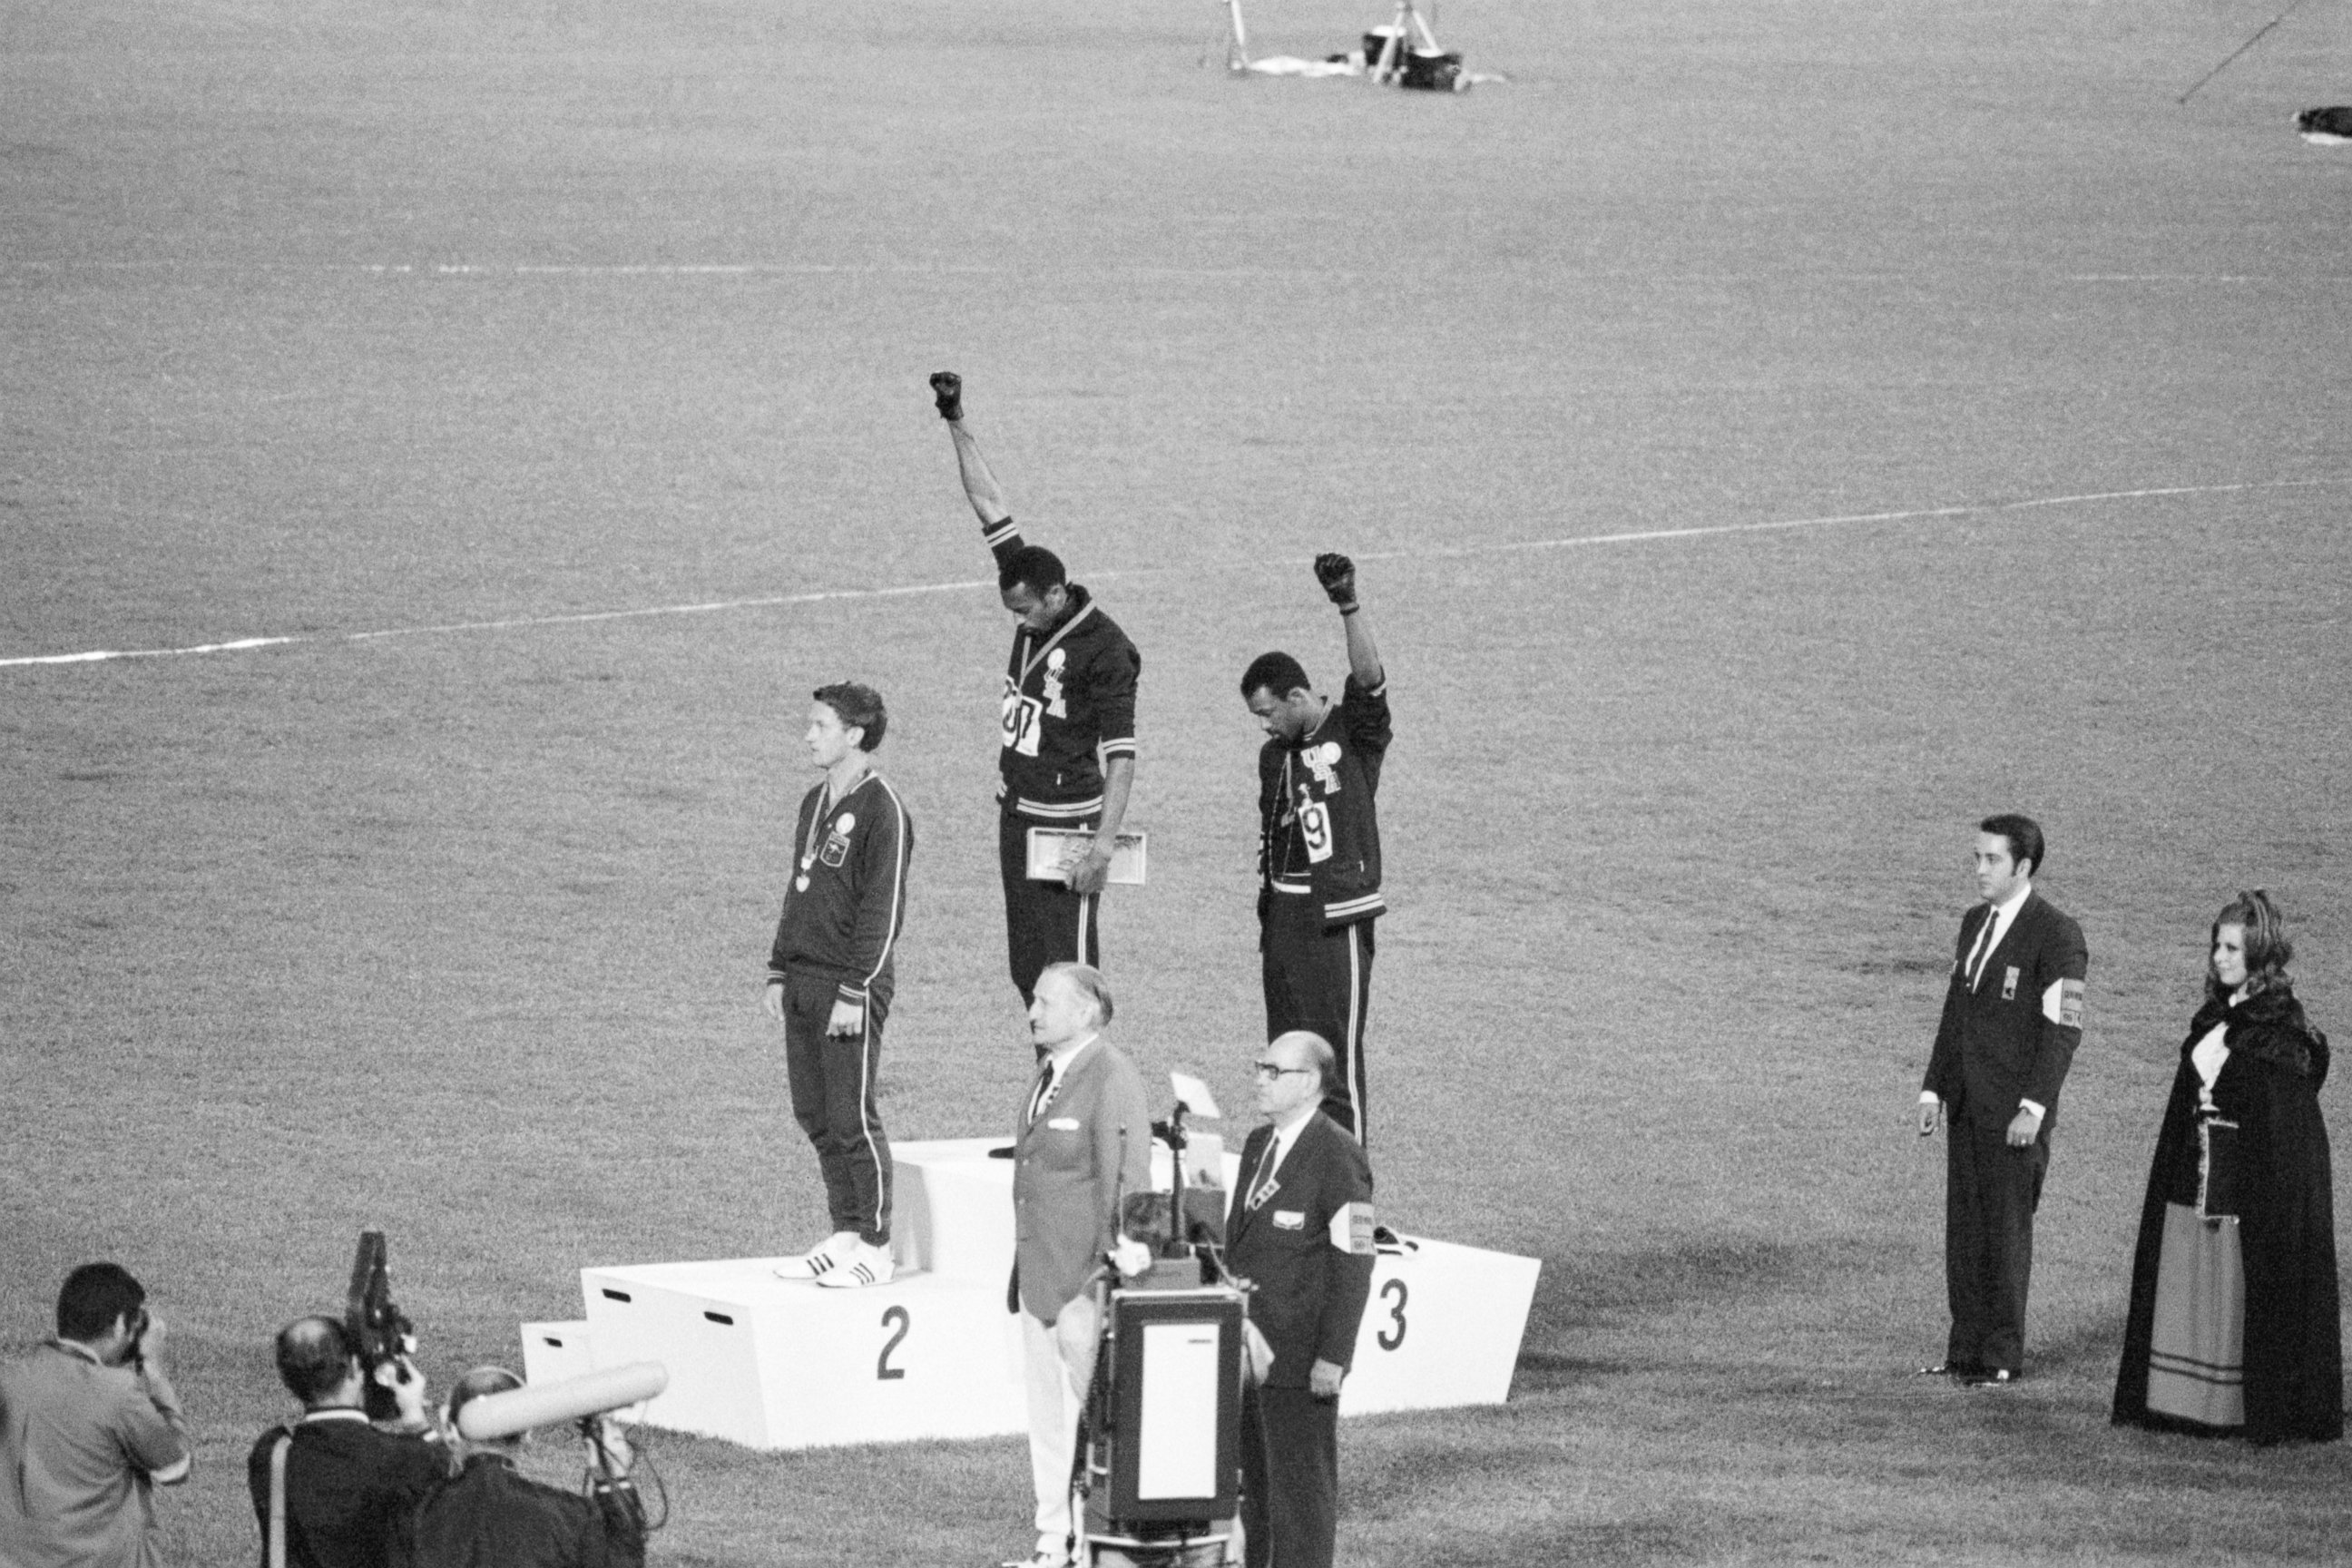 PHOTO: On Oct. 16, 1968, Tommie Smith, center, and John Carlos, right, extend their fists in a victory stand against unfair treatment of blacks in the U.S. during the playing of the "Star-Spangled Banner" at the Summer Olympic Games in Mexico City. 